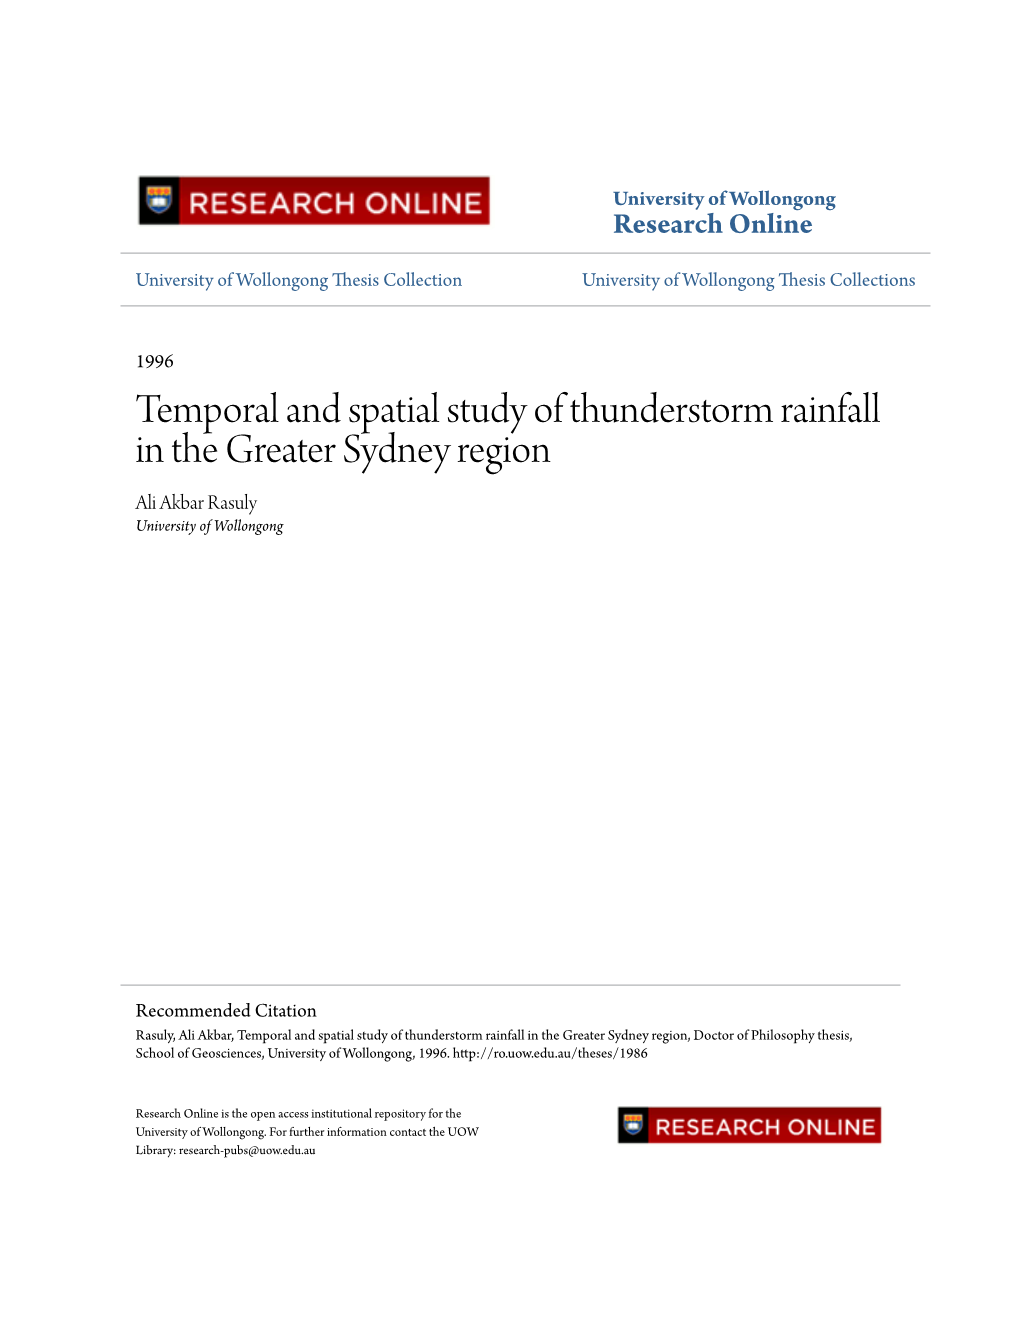 Temporal and Spatial Study of Thunderstorm Rainfall in the Greater Sydney Region Ali Akbar Rasuly University of Wollongong